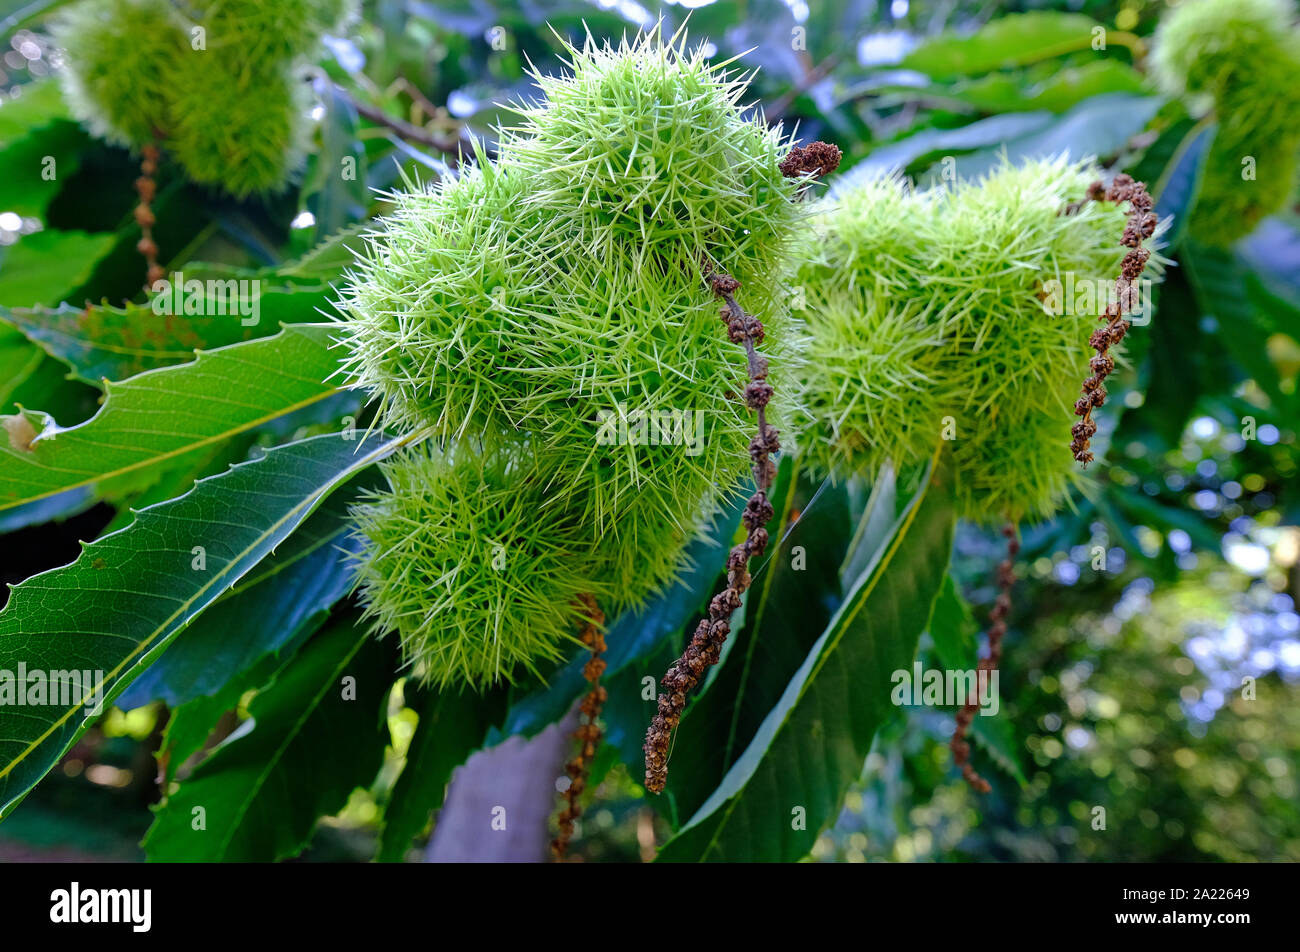 sweet chestnut prickly green seed cases Stock Photo